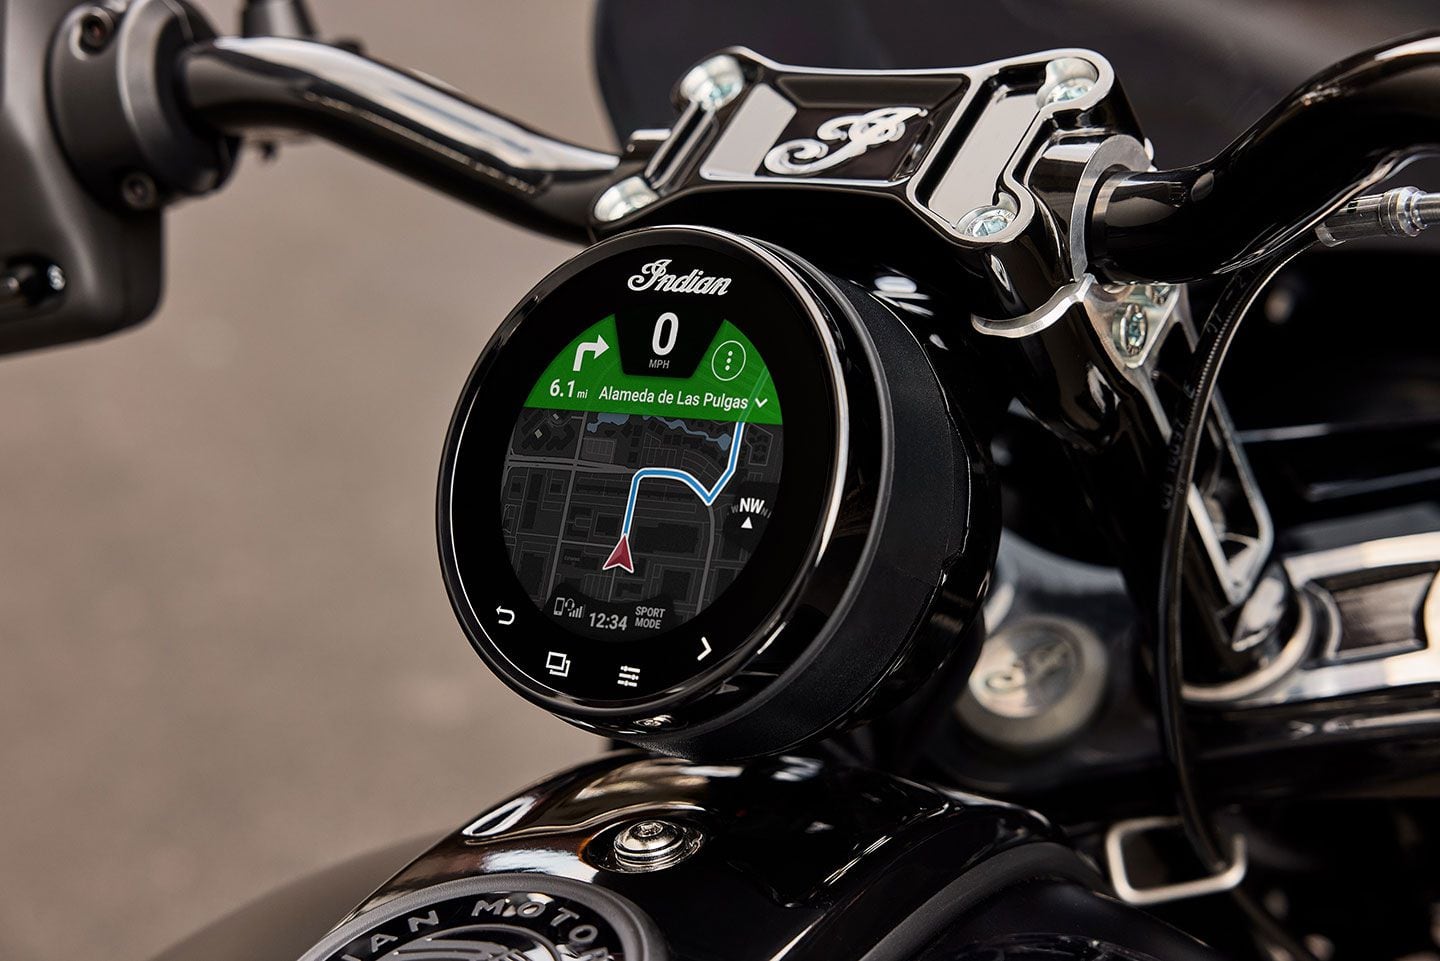 Indian’s Ride Command system with 4-inch round touchscreen (standard) is operated via handlebar controls or the digital display.